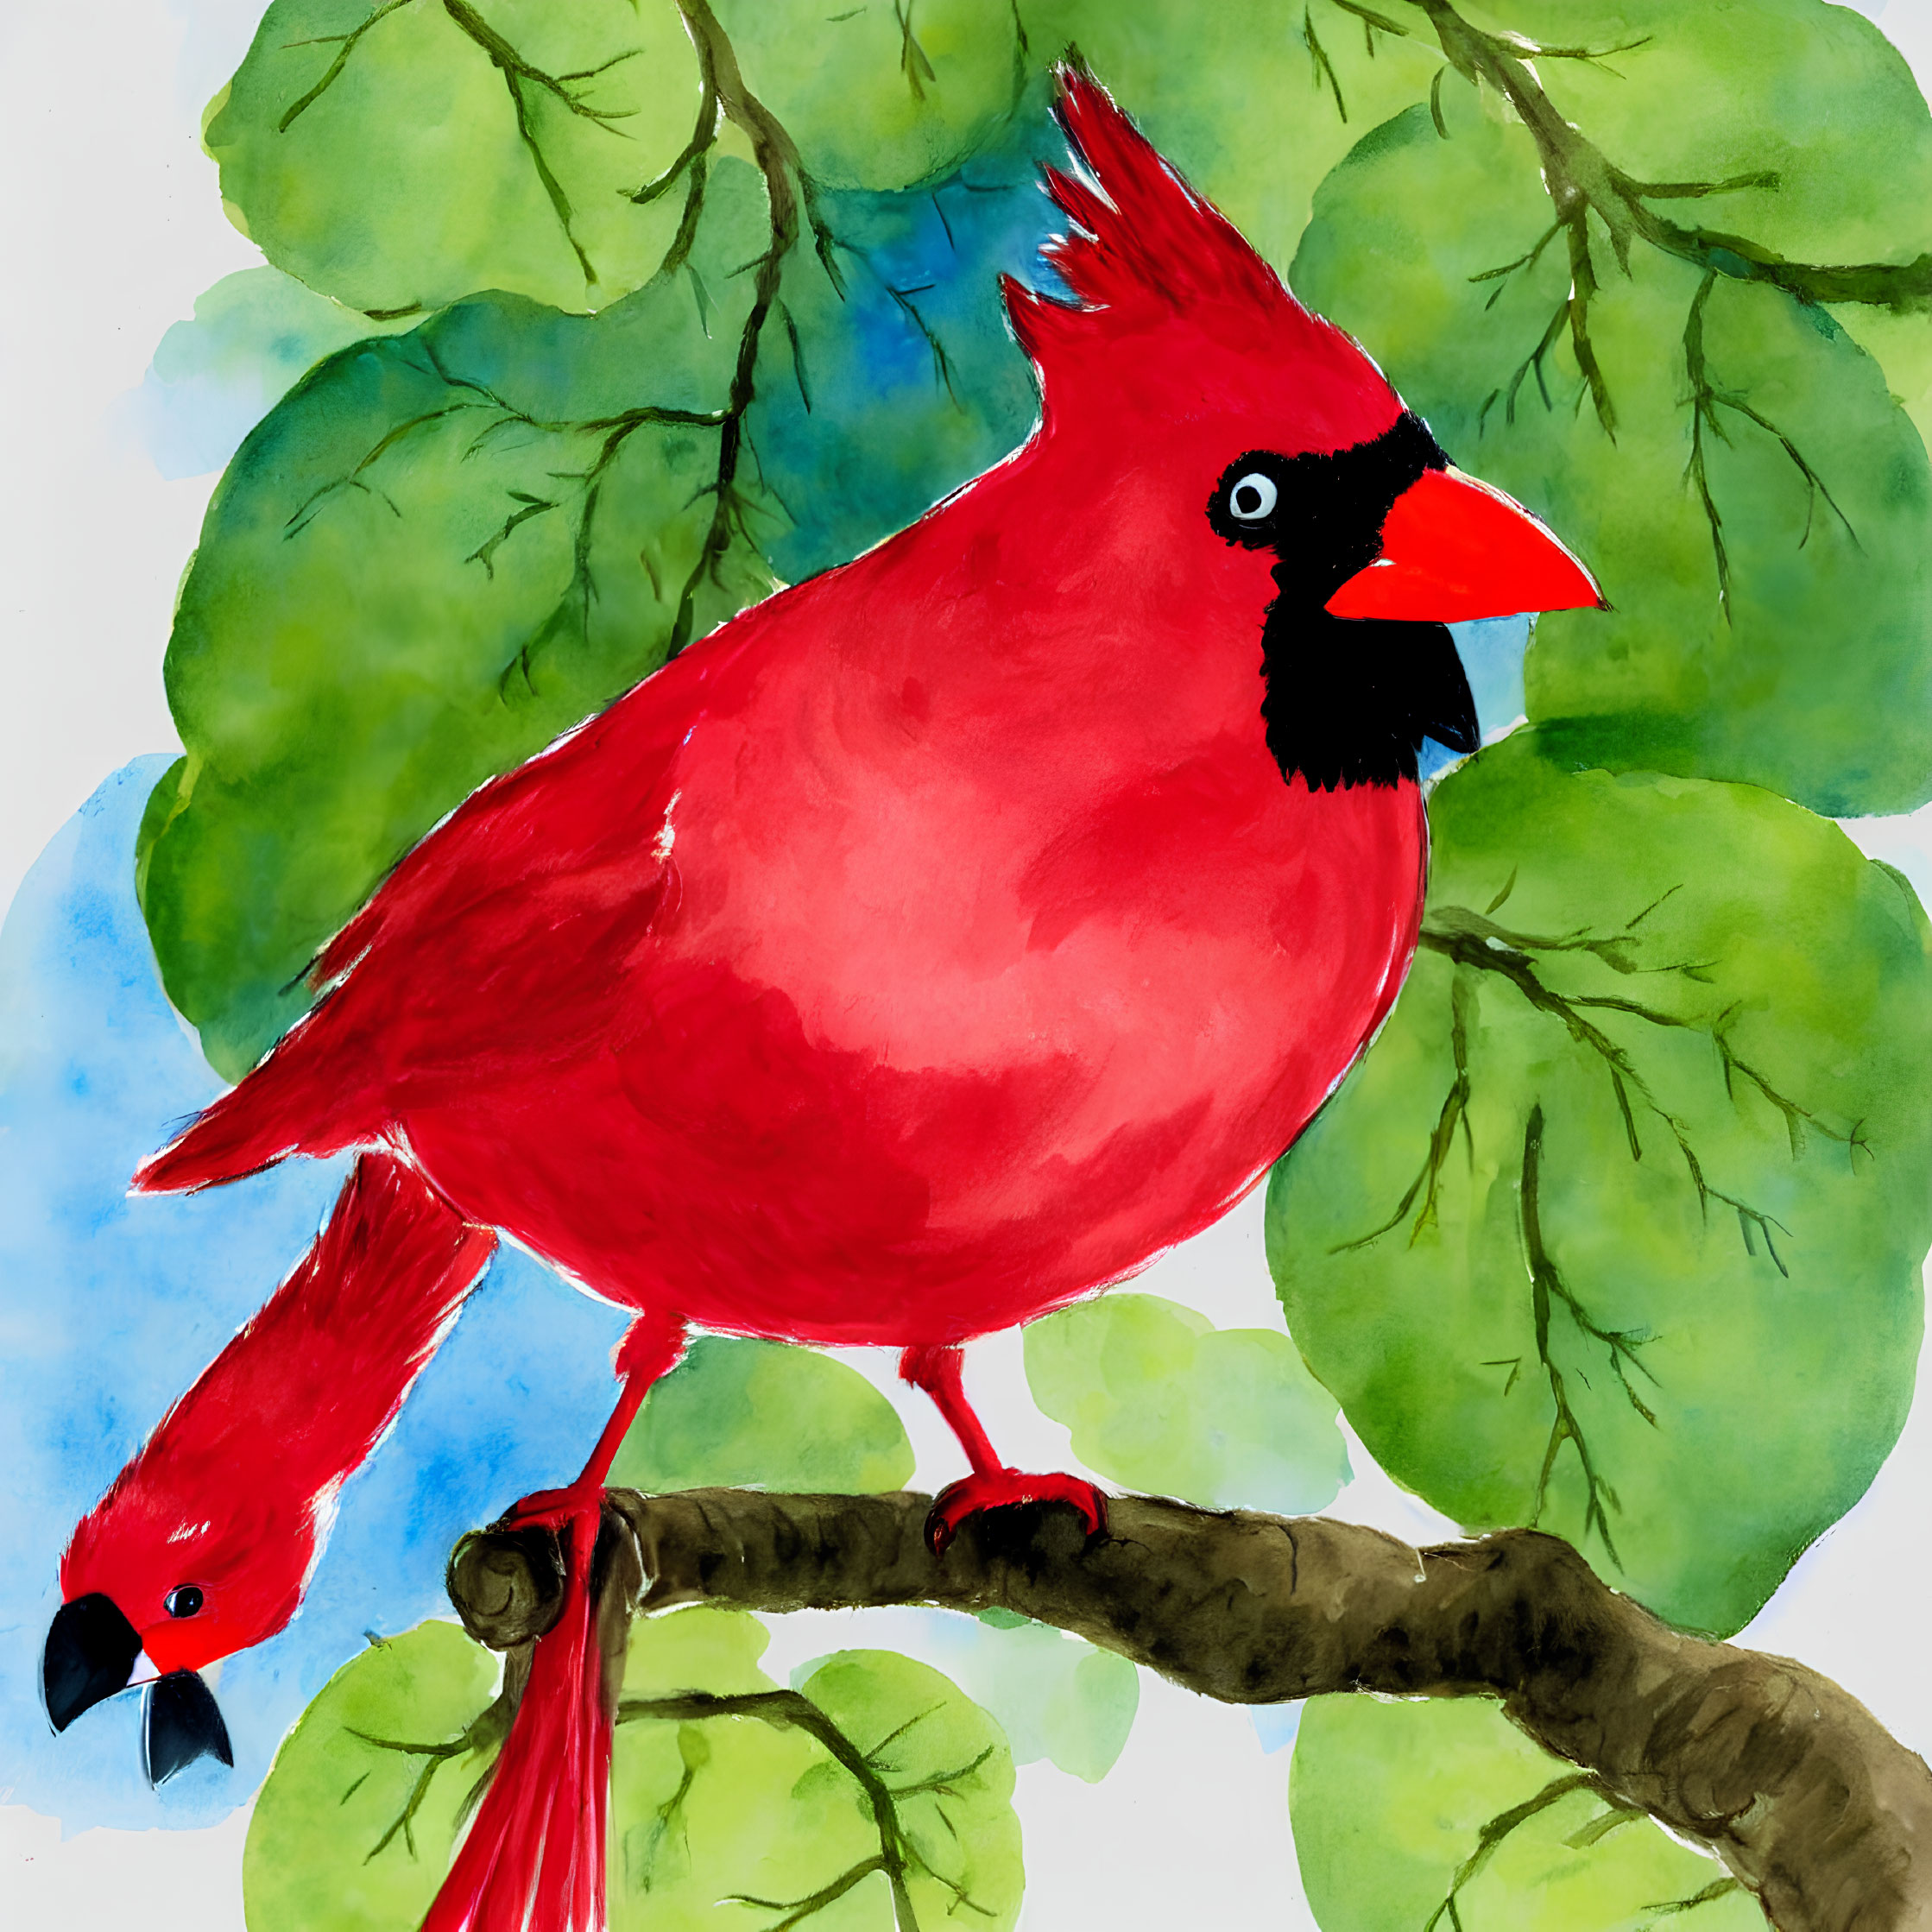 Colorful watercolor illustration: Red cardinal on tree branch